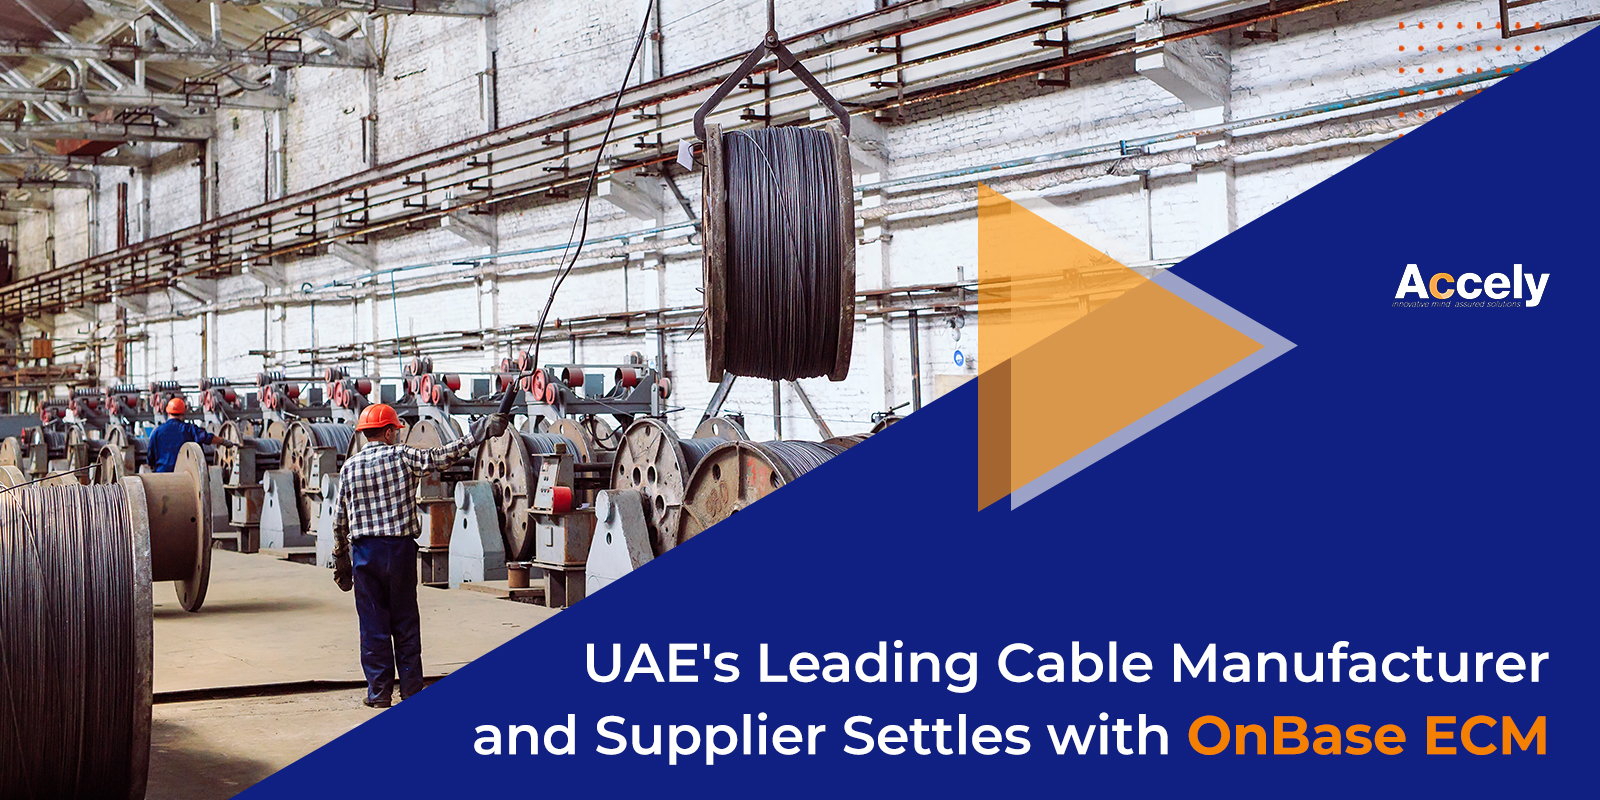 UAE's Leading Cable Manufacturer and Supplier Settles with OnBase ECM